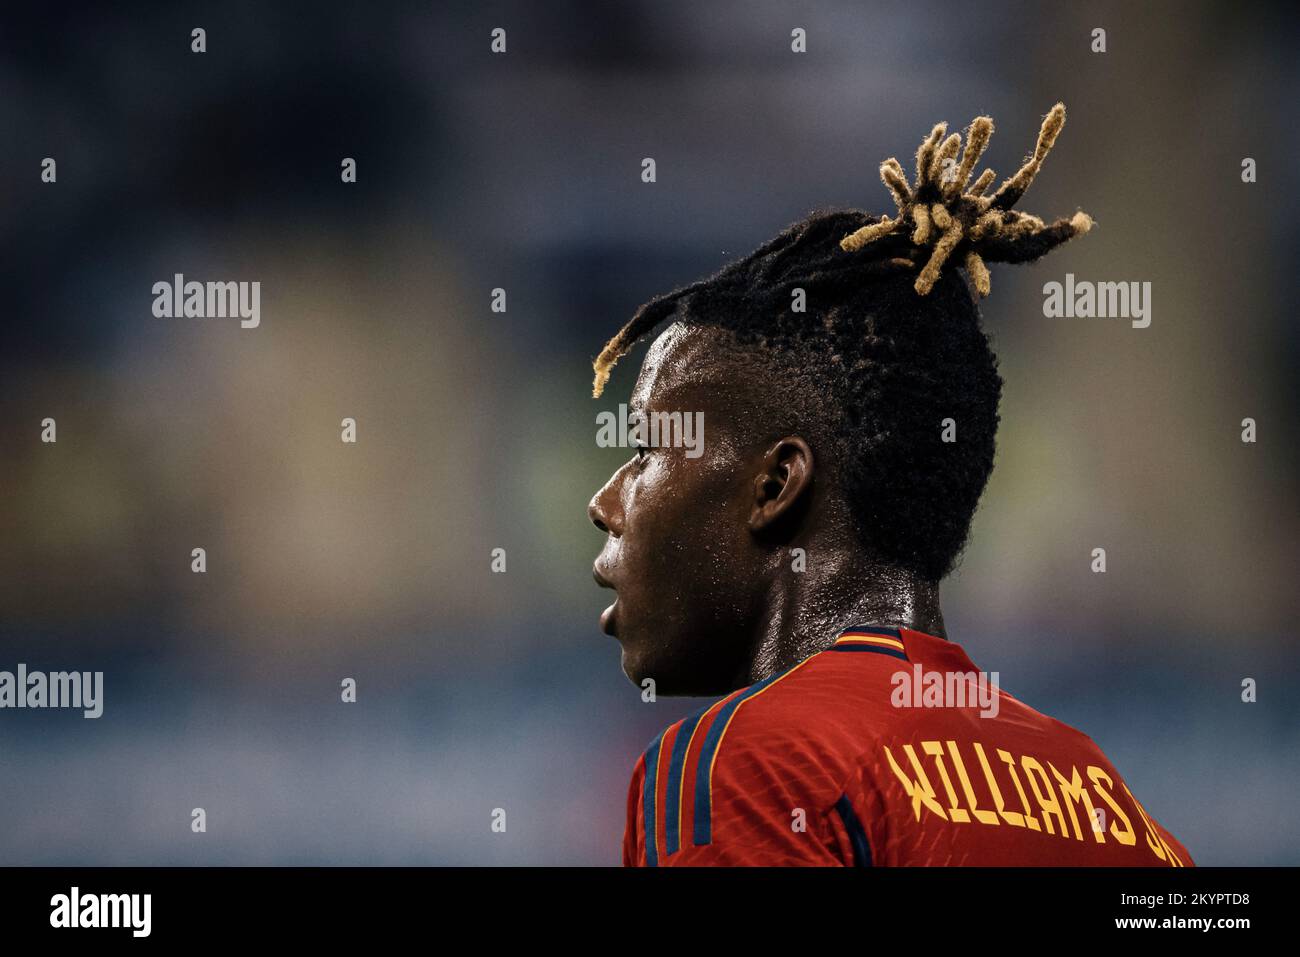 Doha, Catar. 01st Dec, 2022. WILLIAMS Nico of Spain during a match between Japan and Spain, valid for the group stage of the World Cup, held at Khalifa International Stadium in Doha, Qatar. Credit: Marcelo Machado de Melo/FotoArena/Alamy Live News Stock Photo